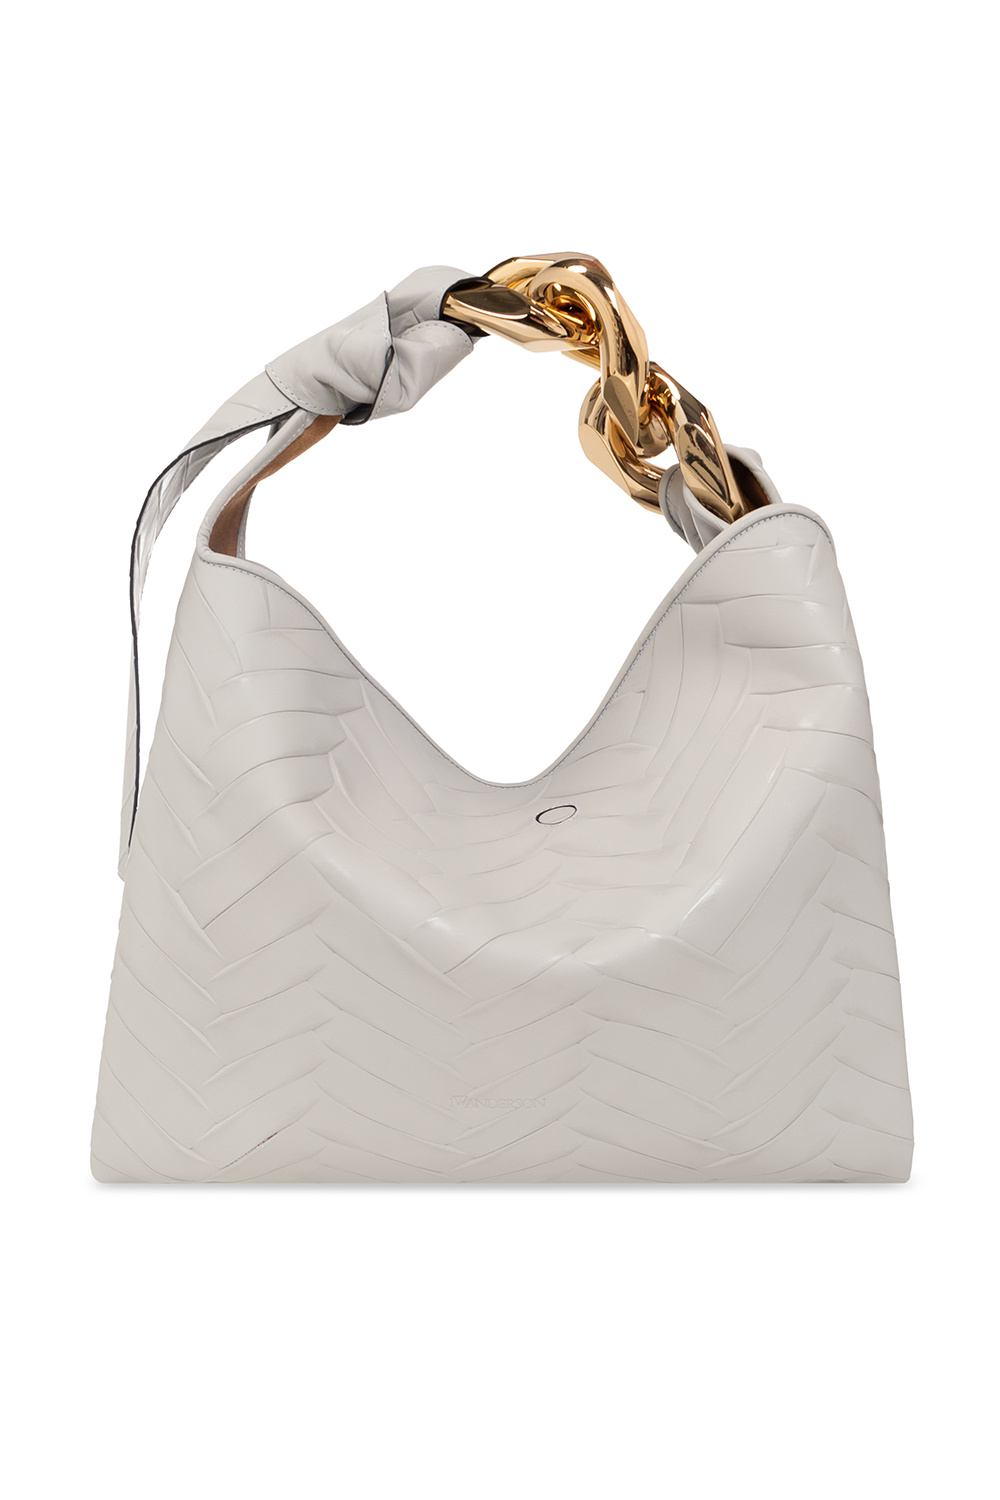 JW Anderson small Chain shoulder bag - White